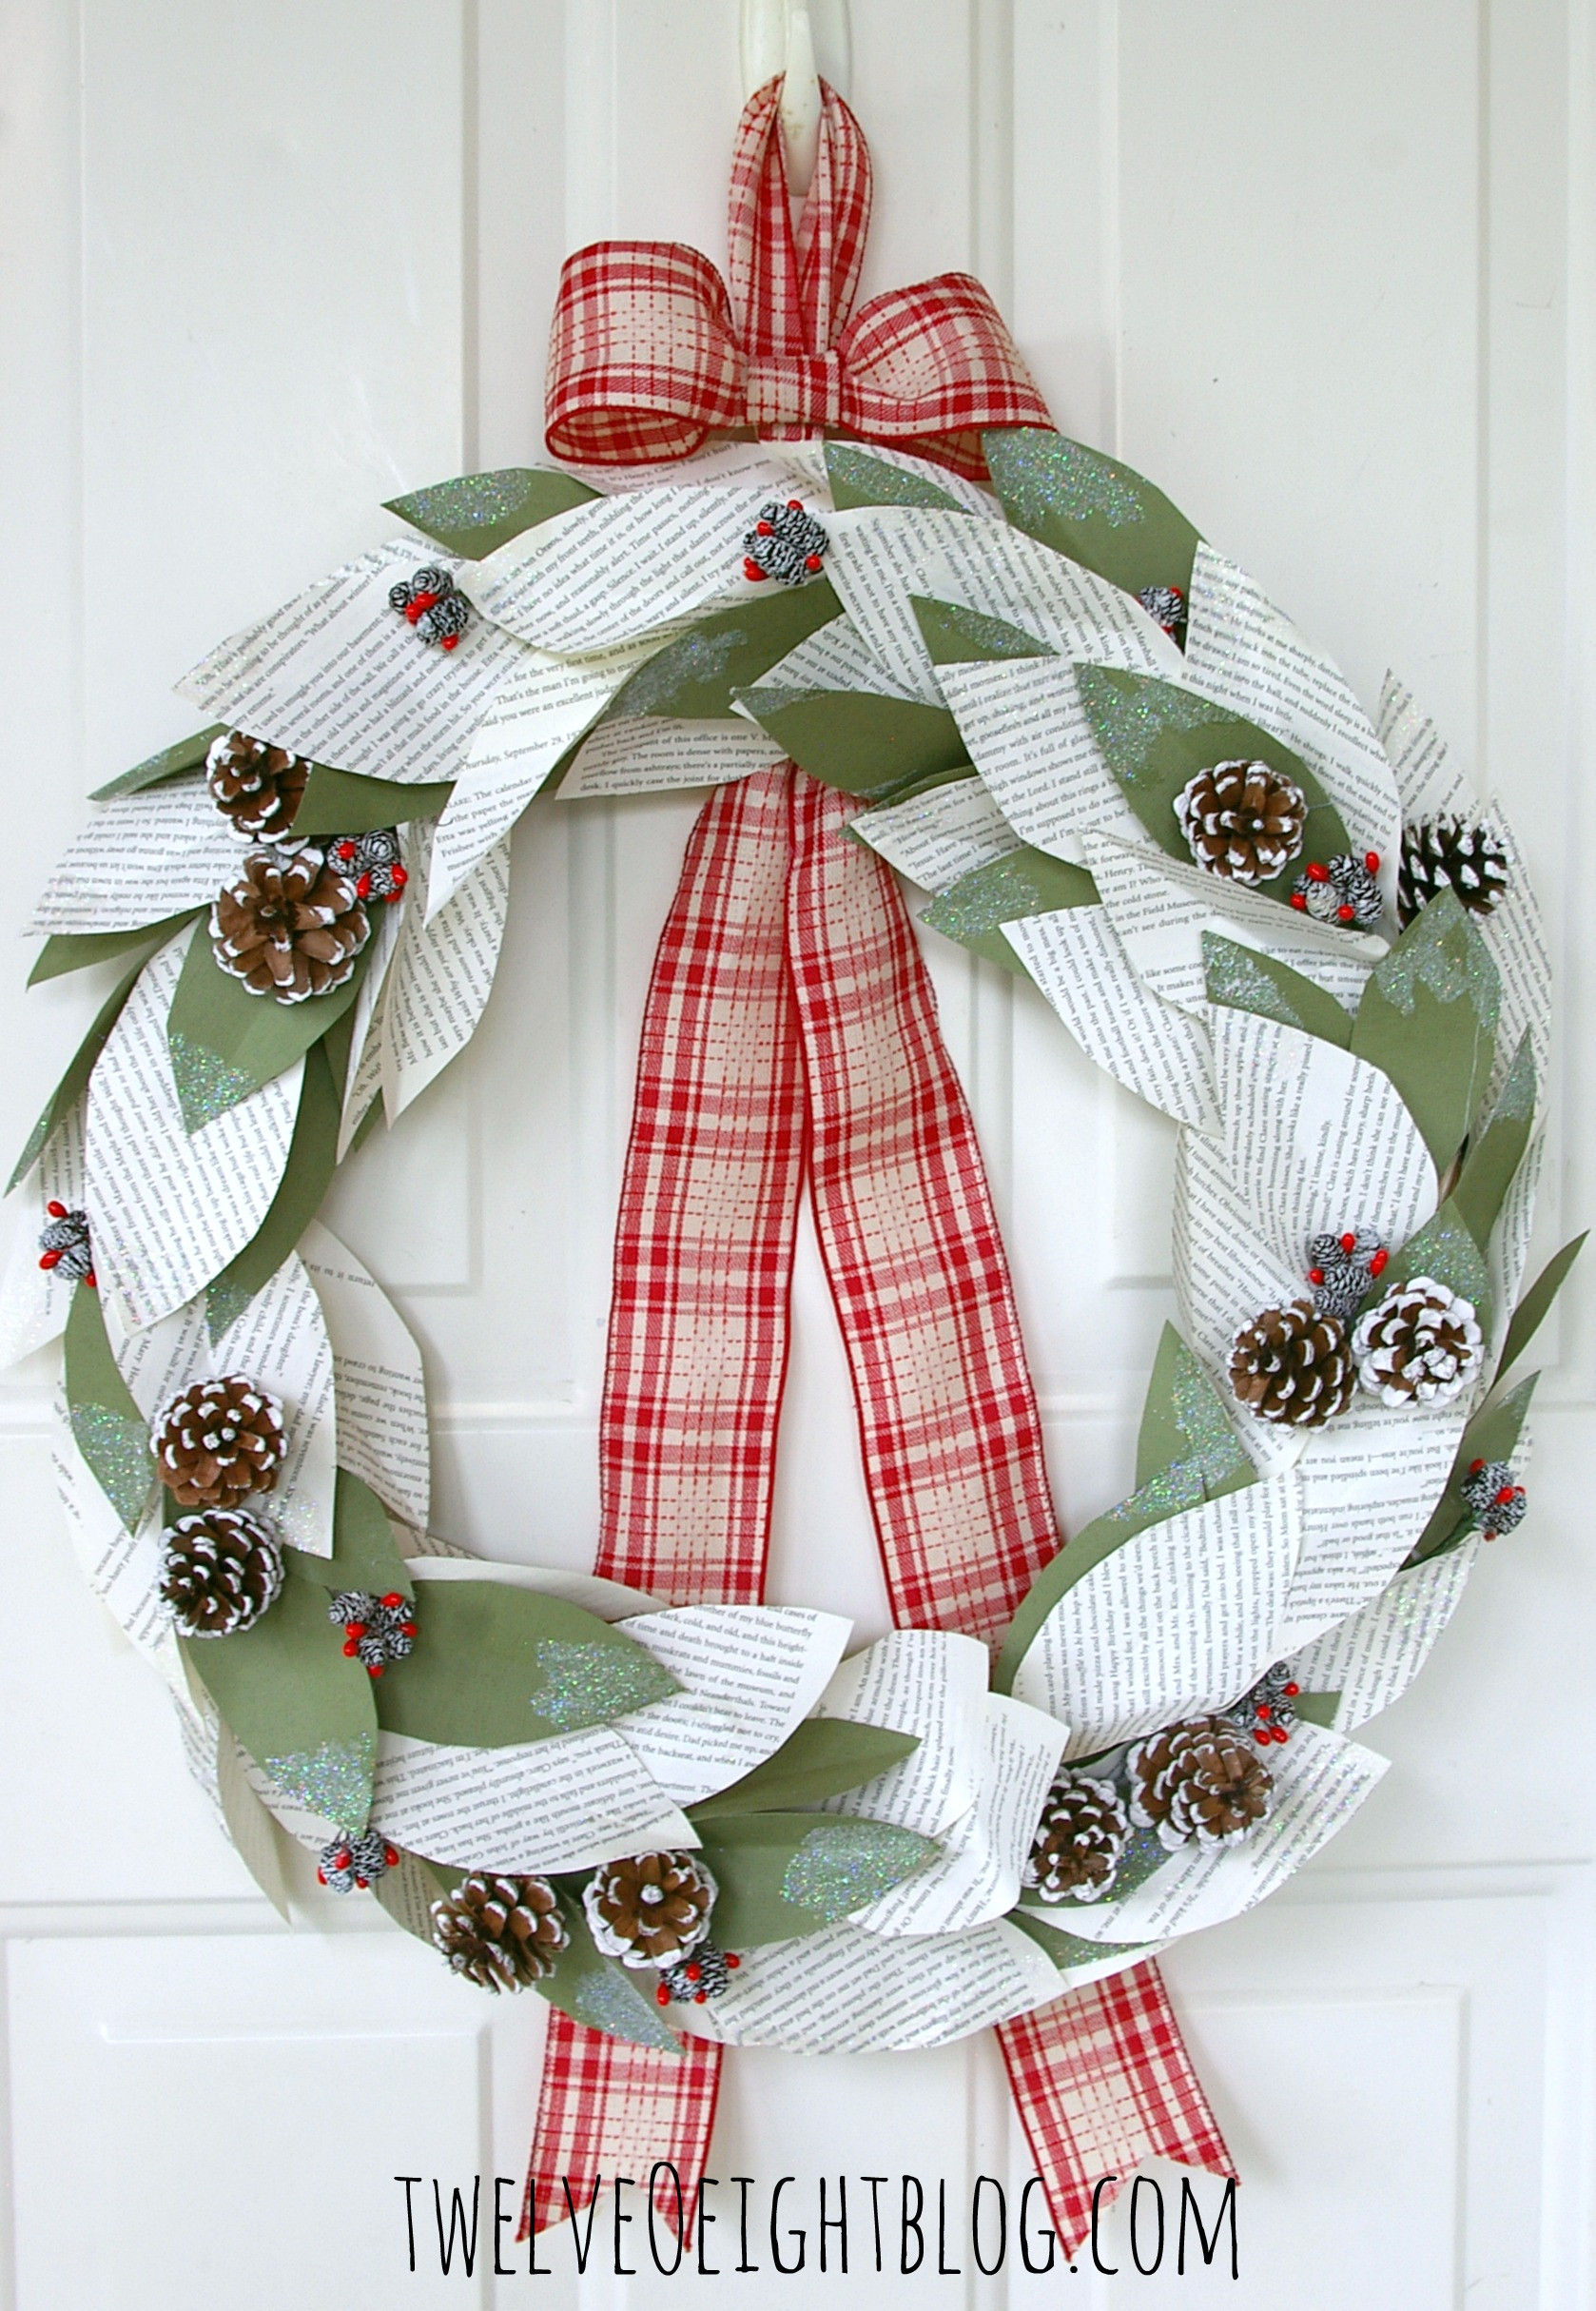 Winter Wreaths Diy
 DIY Winter Wreath Christmas inspiration for this year